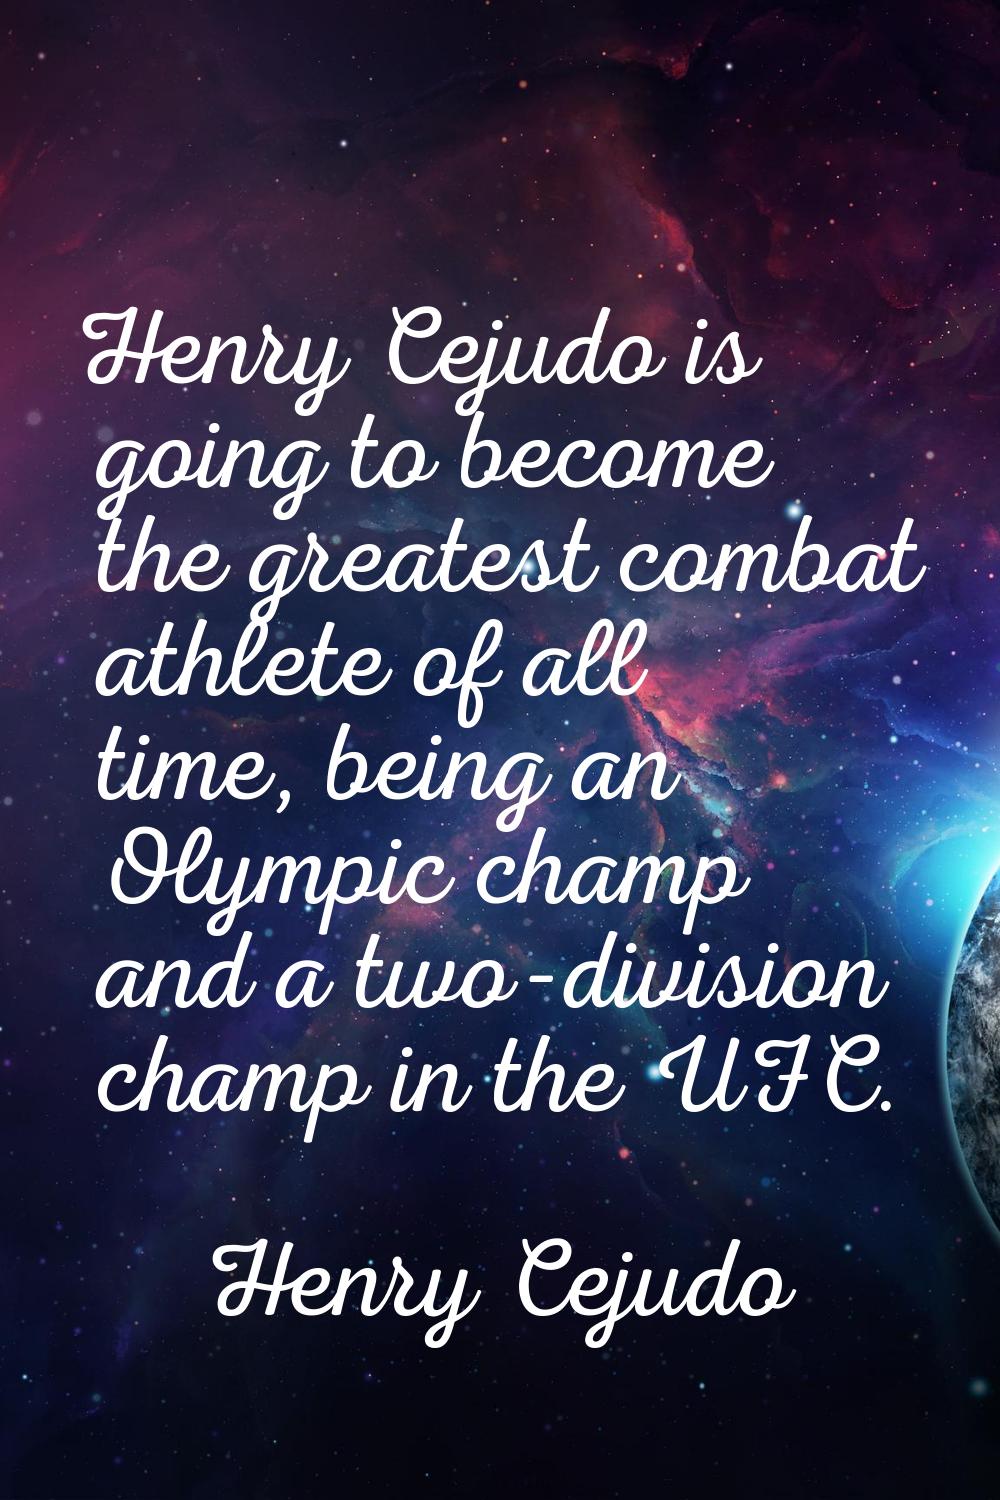 Henry Cejudo is going to become the greatest combat athlete of all time, being an Olympic champ and